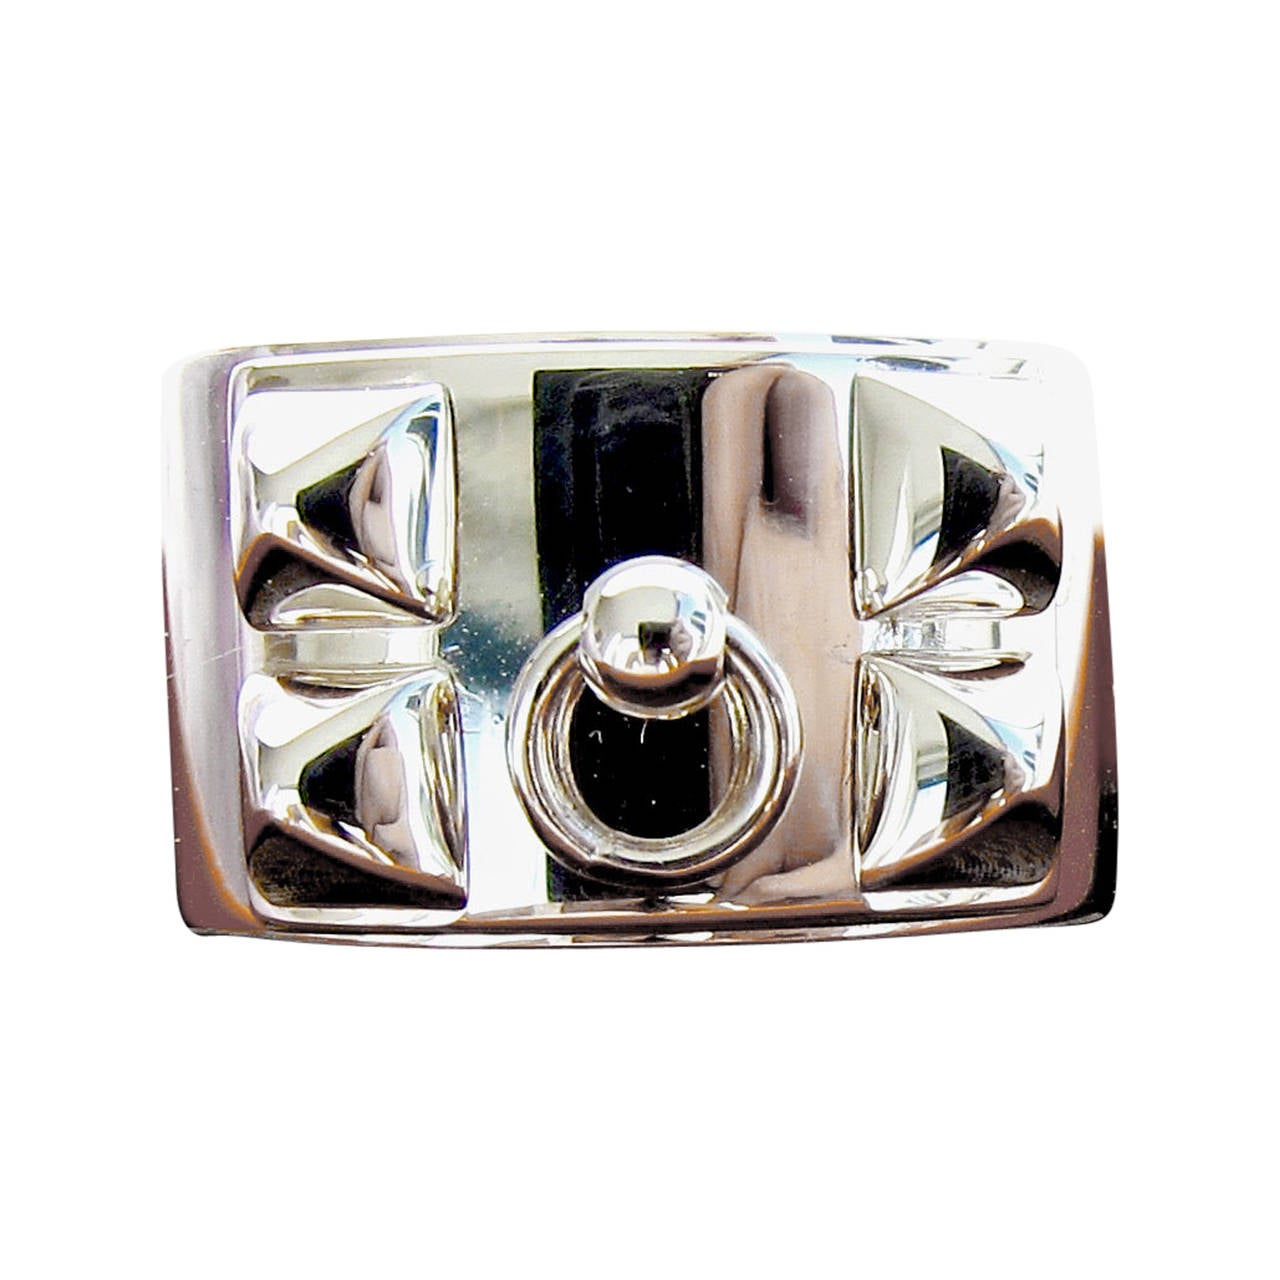 Hermes Collier de Chien Solid Silver Ring 53 Iconic Below Retail